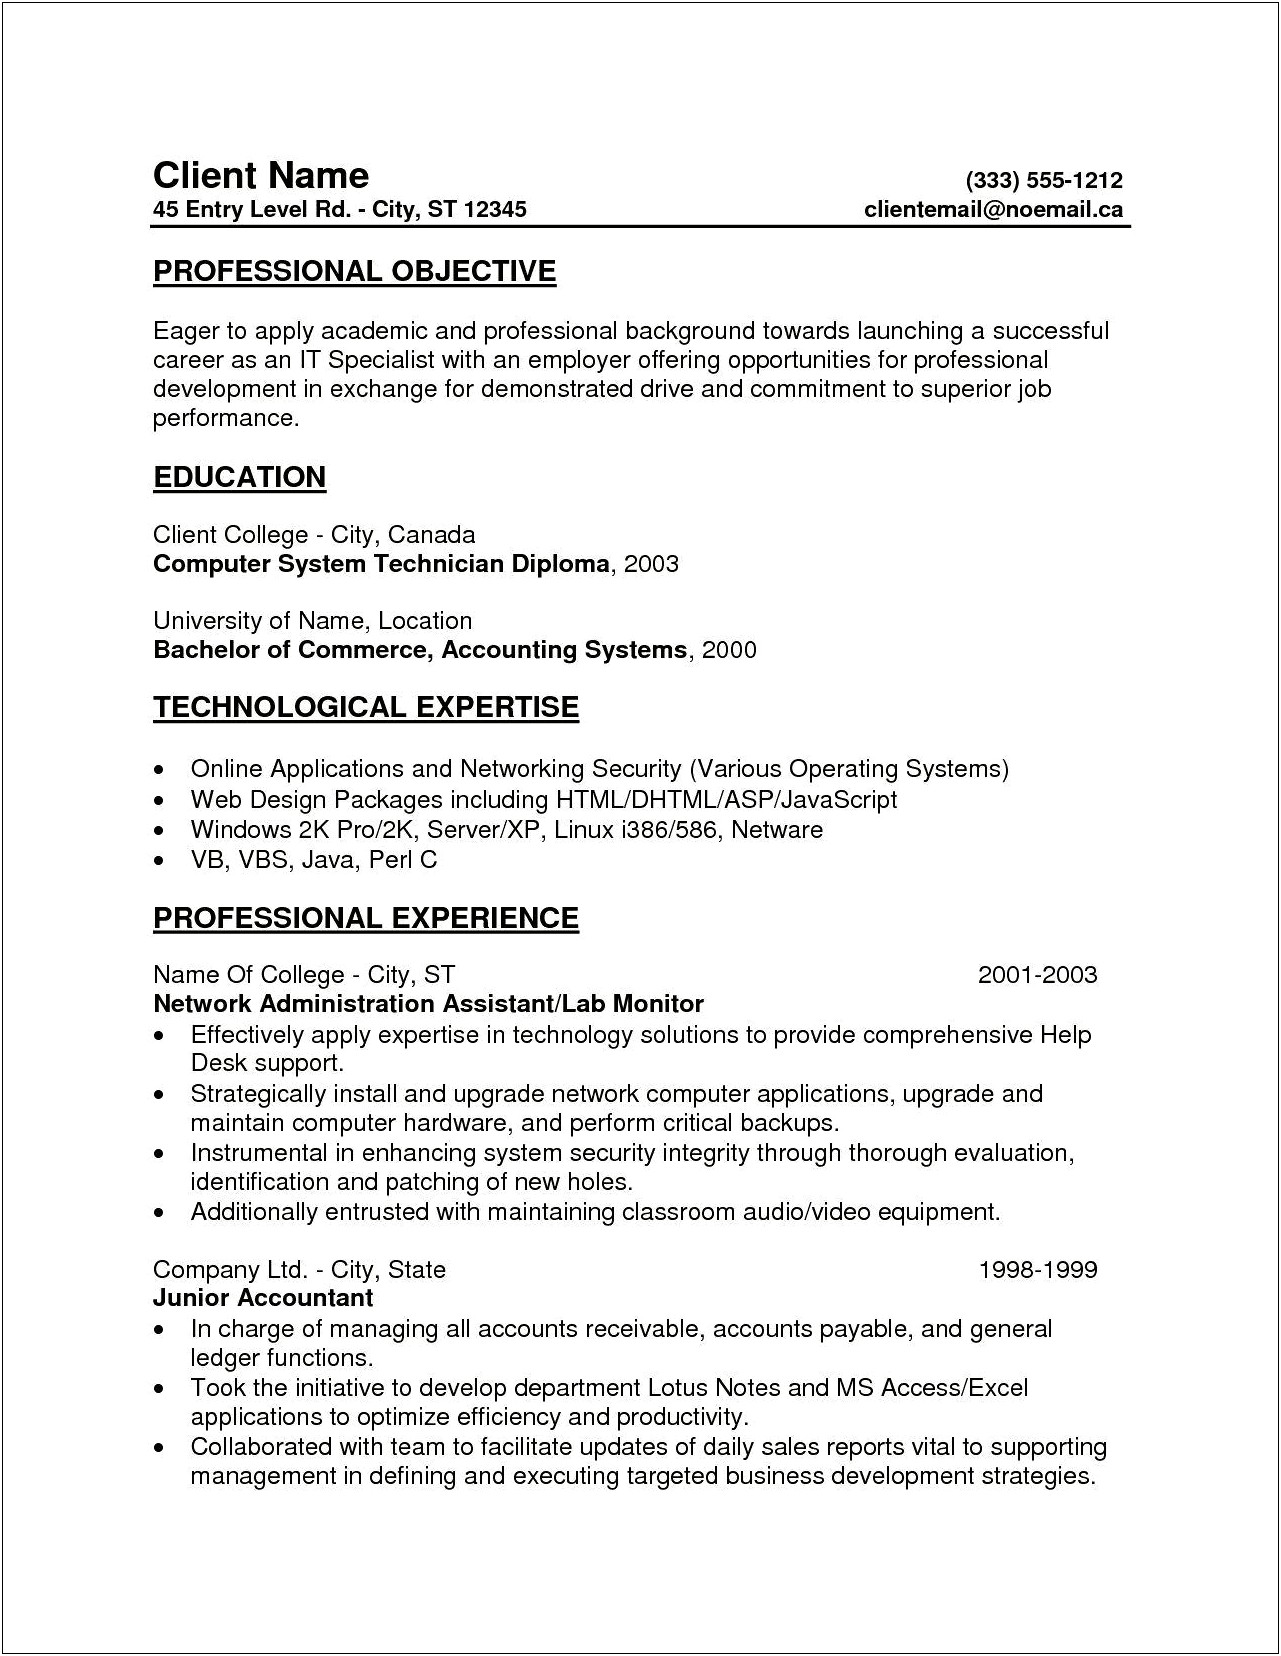 Resume Objective For Entry Level It Positions